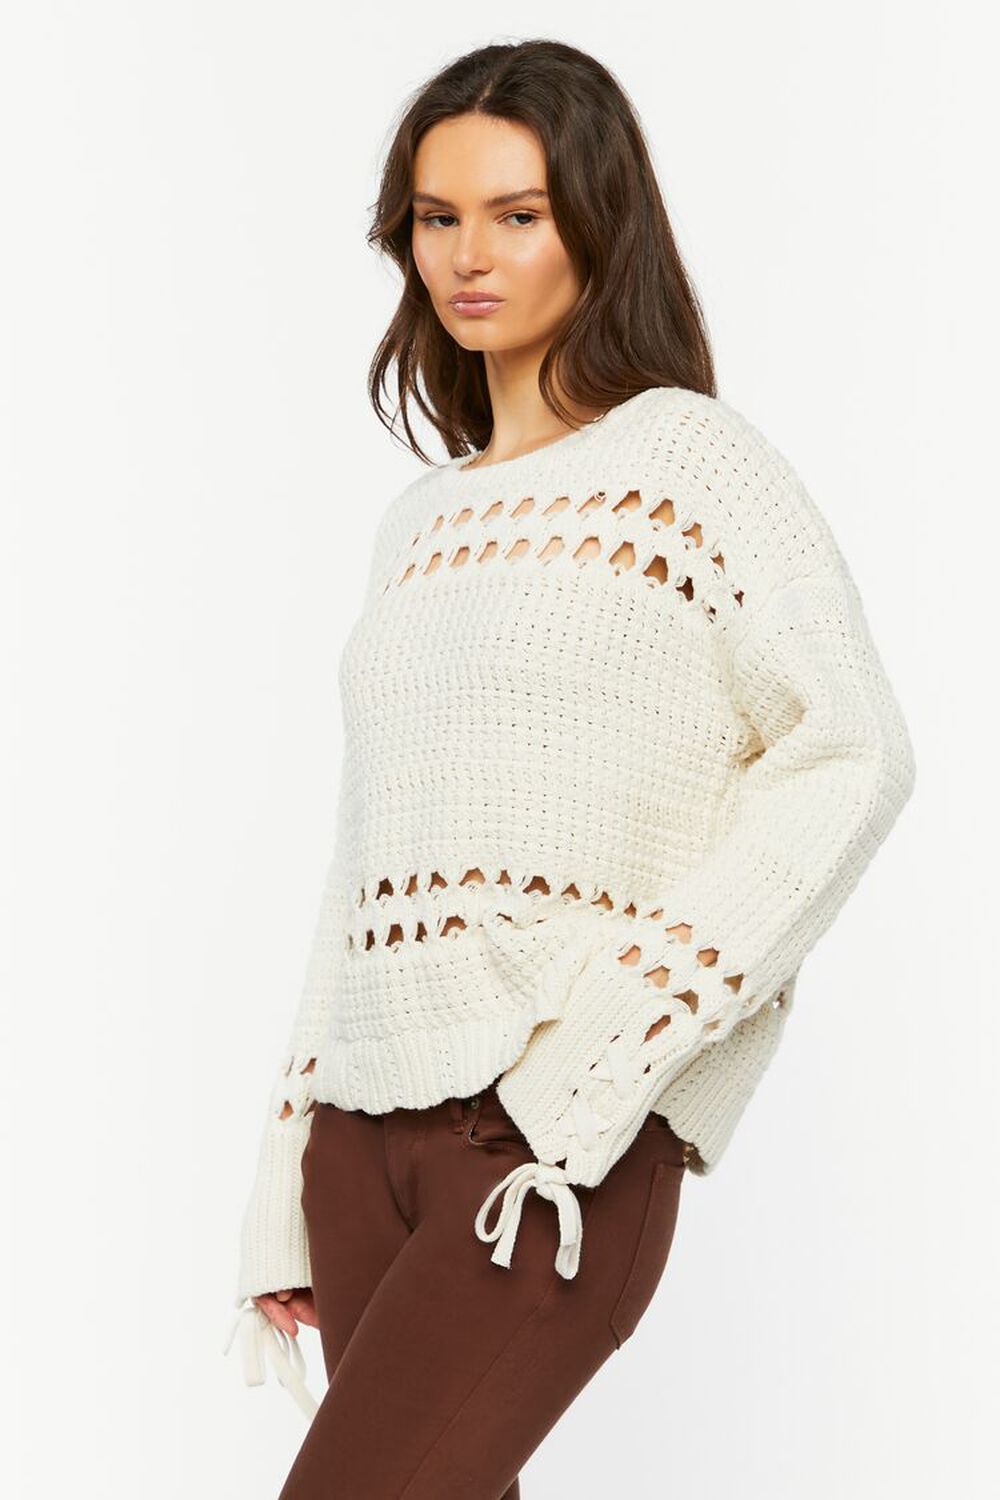 CREAM Pointelle Lace-Up Cutout Sweater, image 2